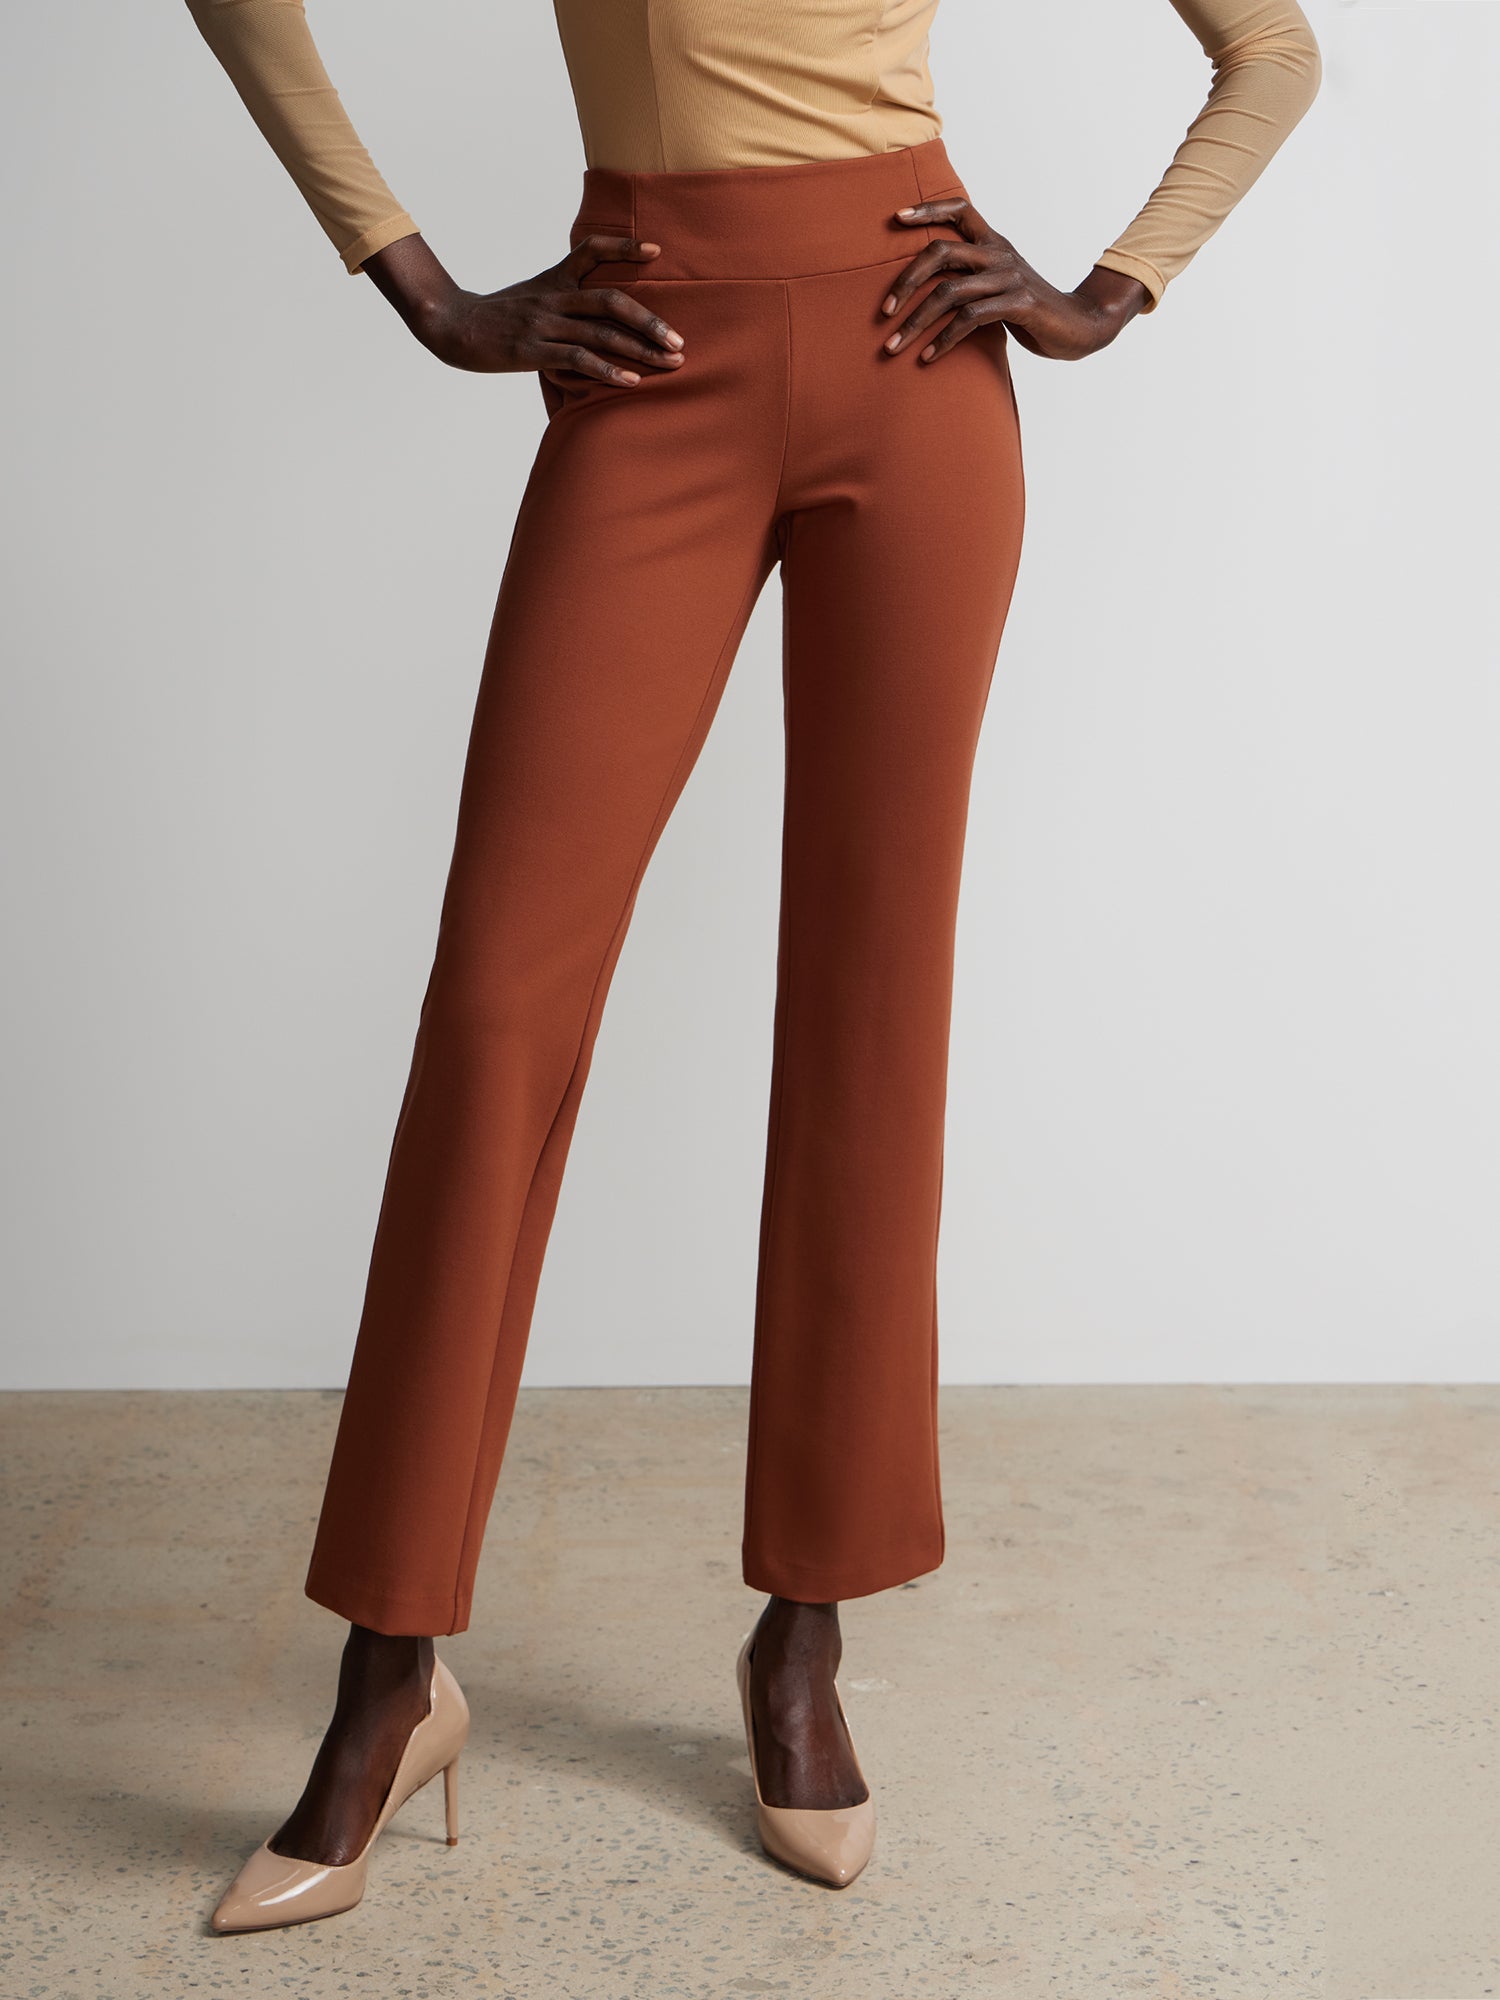 High-waisted pants for tall women and how to style them